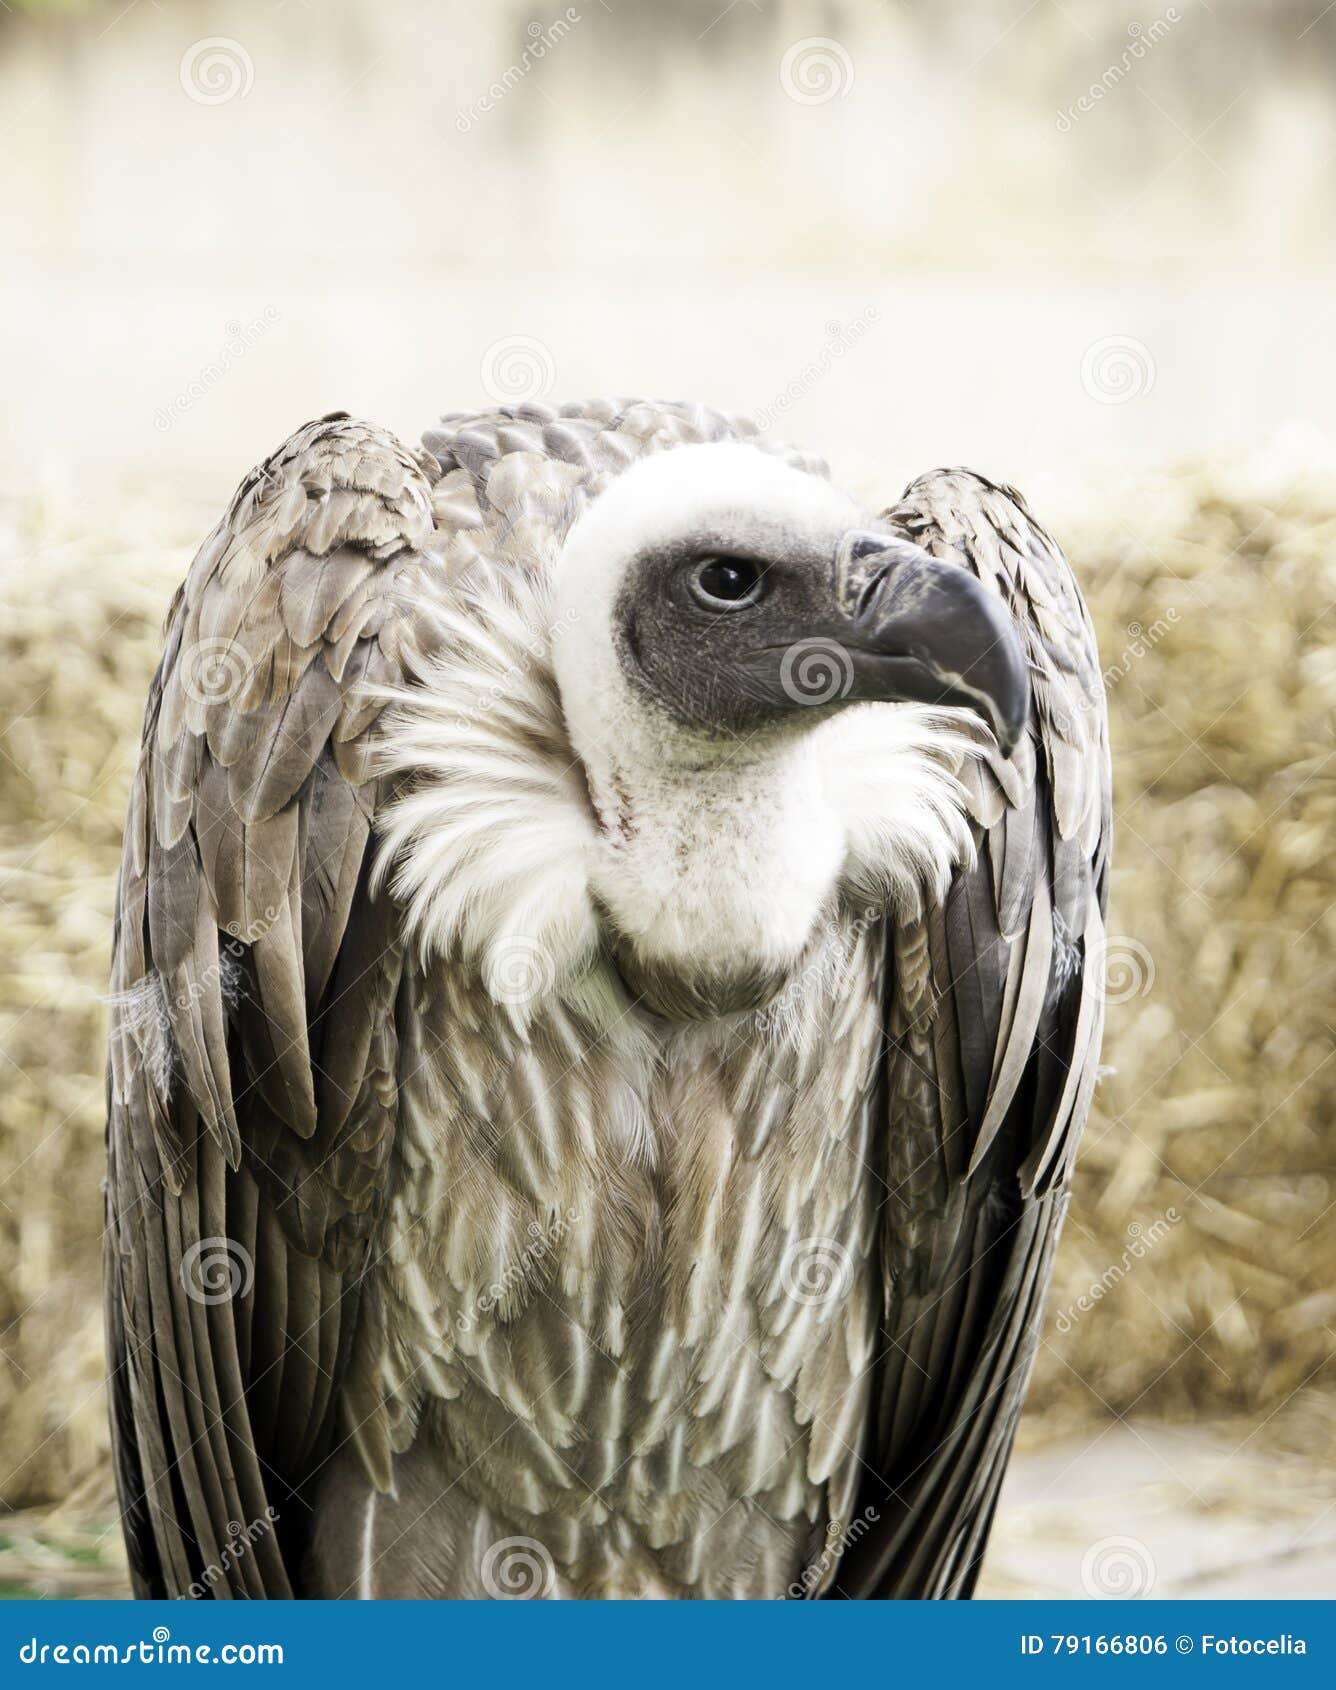 Wild vulture exhibition stock photo. Image of asian, africa - 79166806